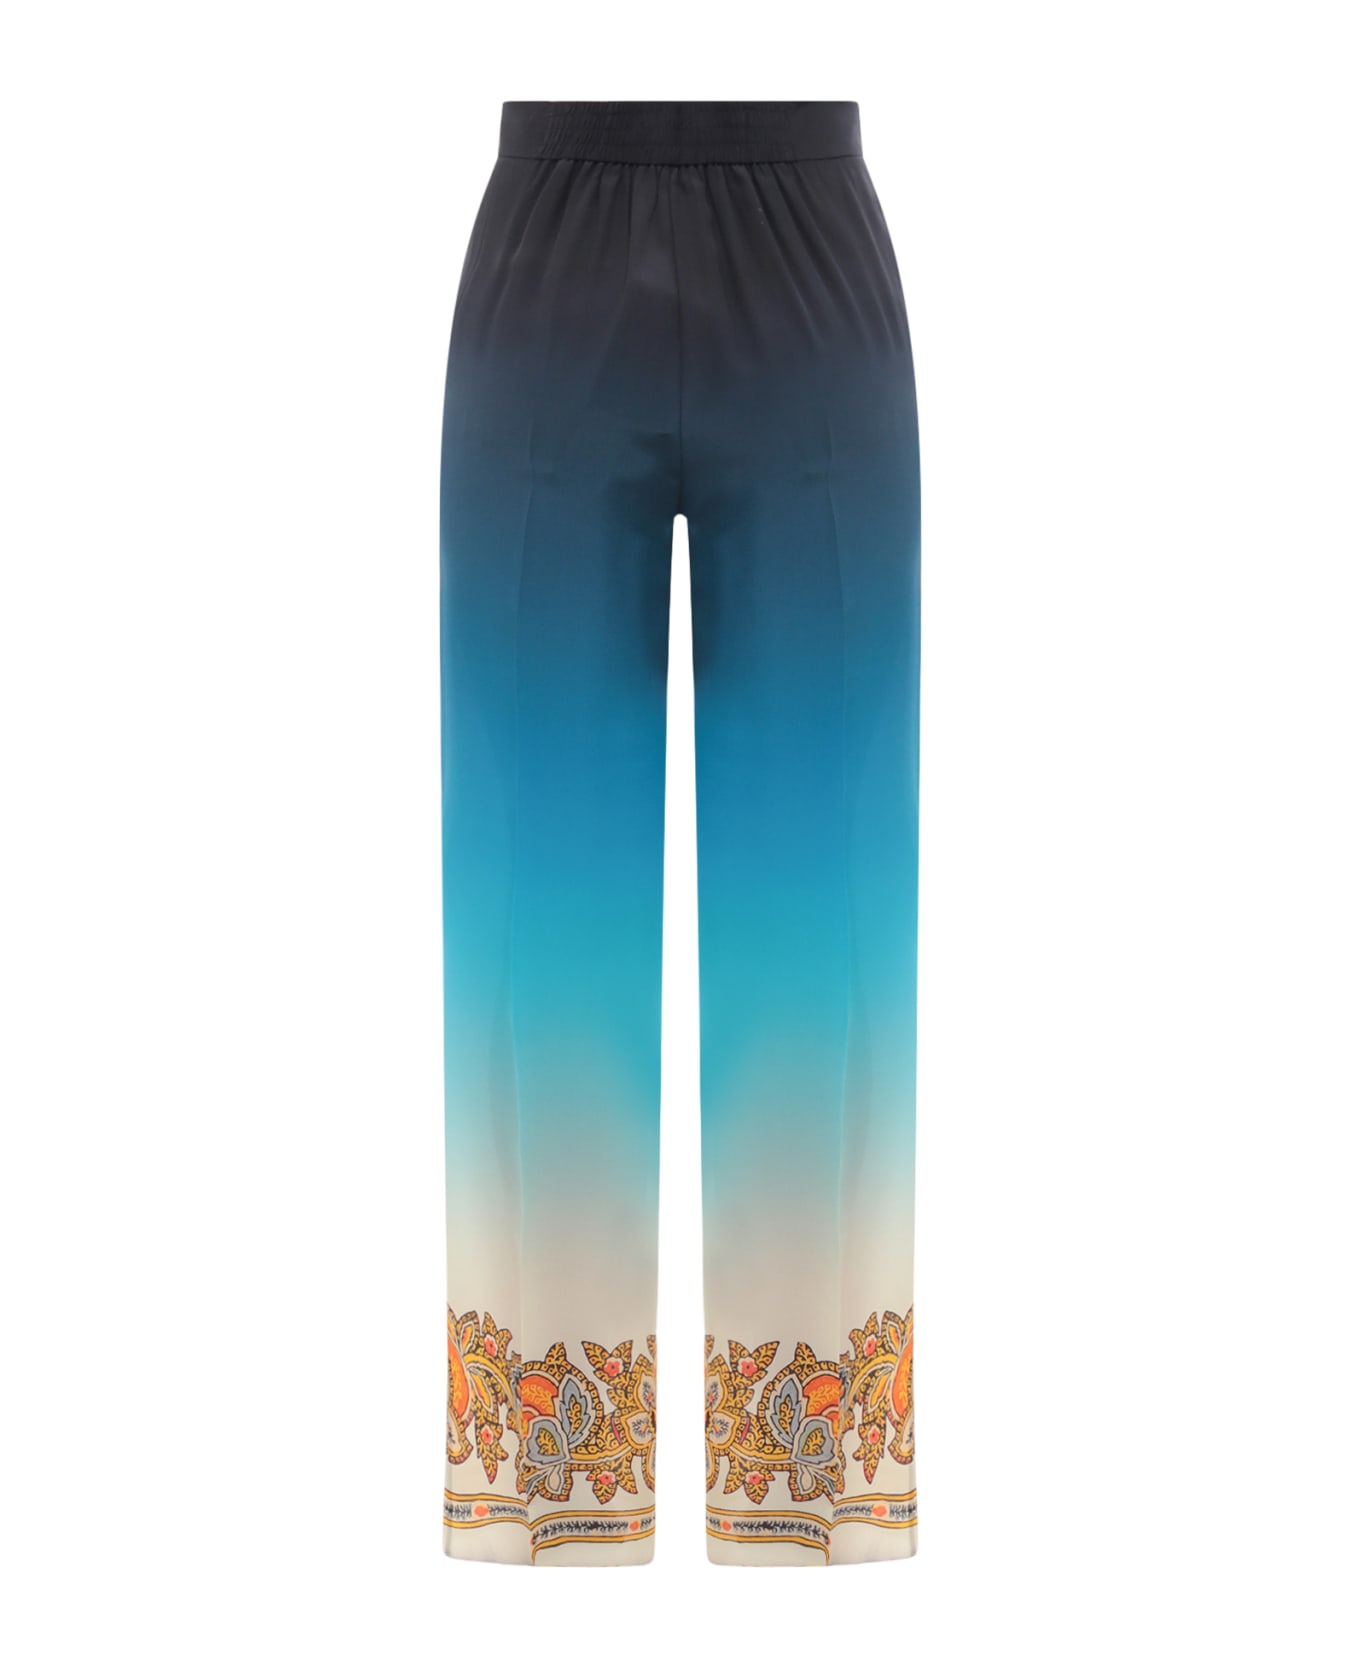 Etro Blue Palazzo Trousers In Shaded Crepe De Chine With Paisley Patterns - Blue ボトムス